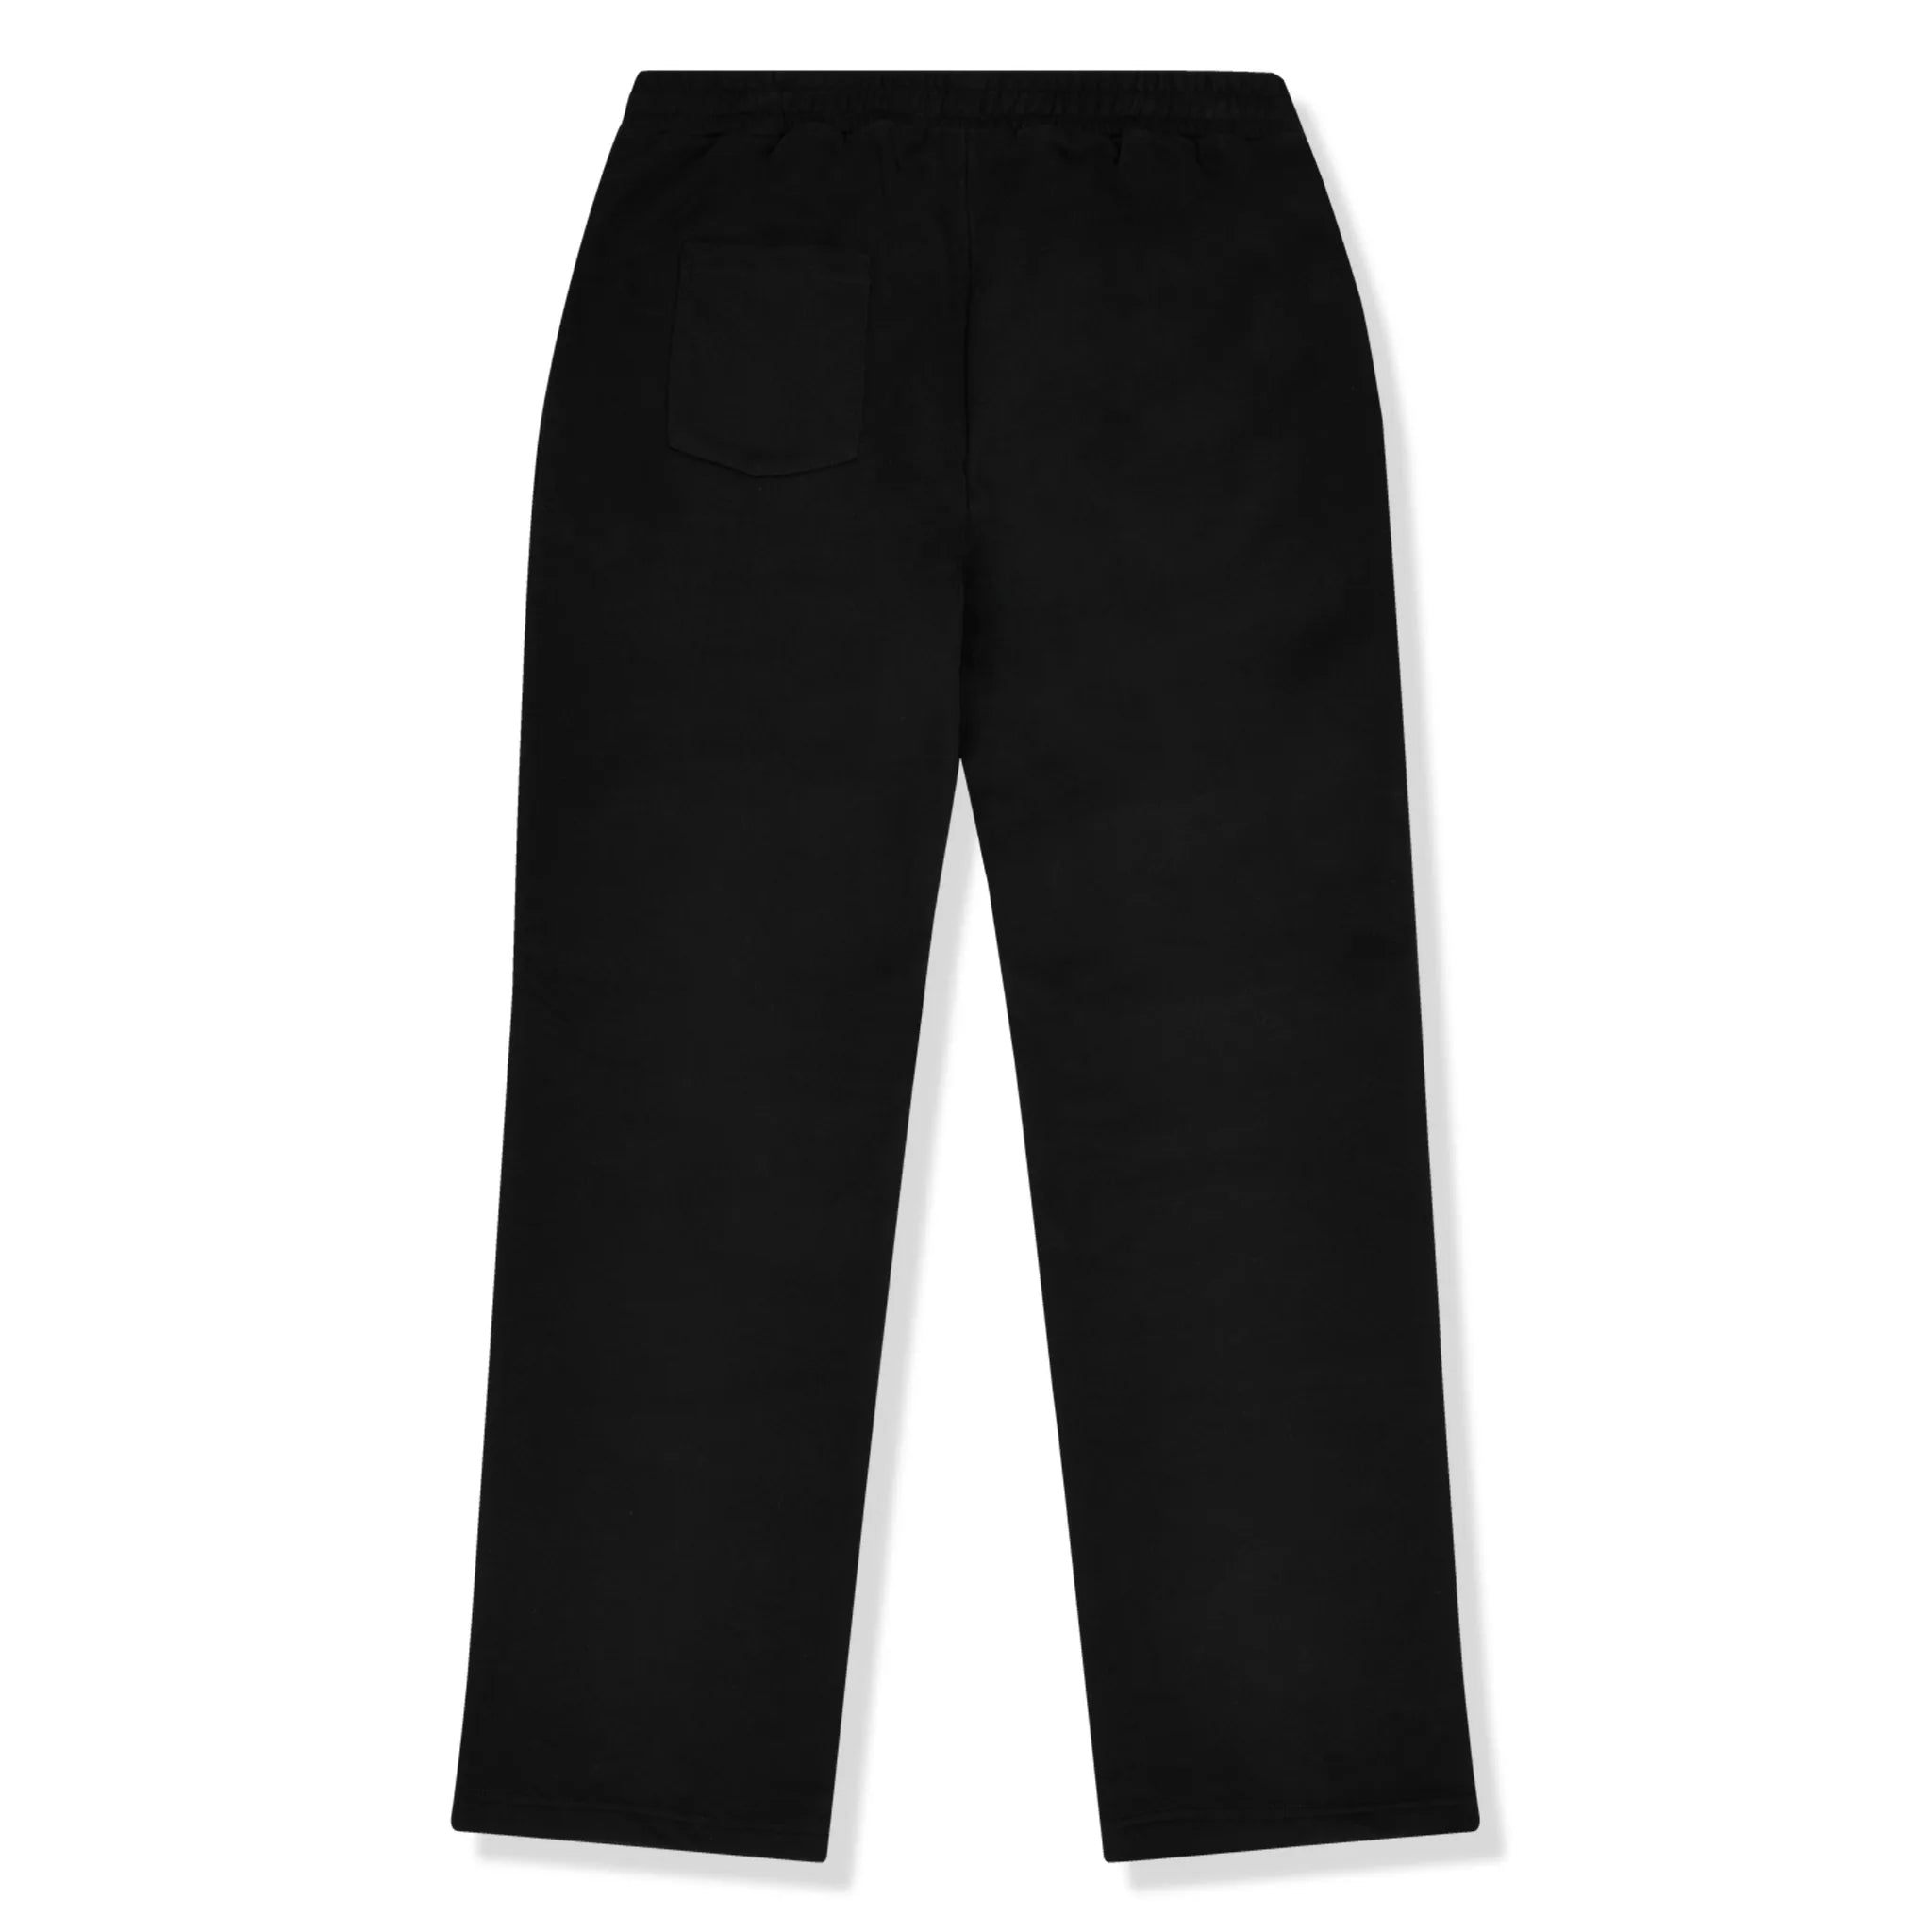 Back view of Carsicko London Black Track Pants